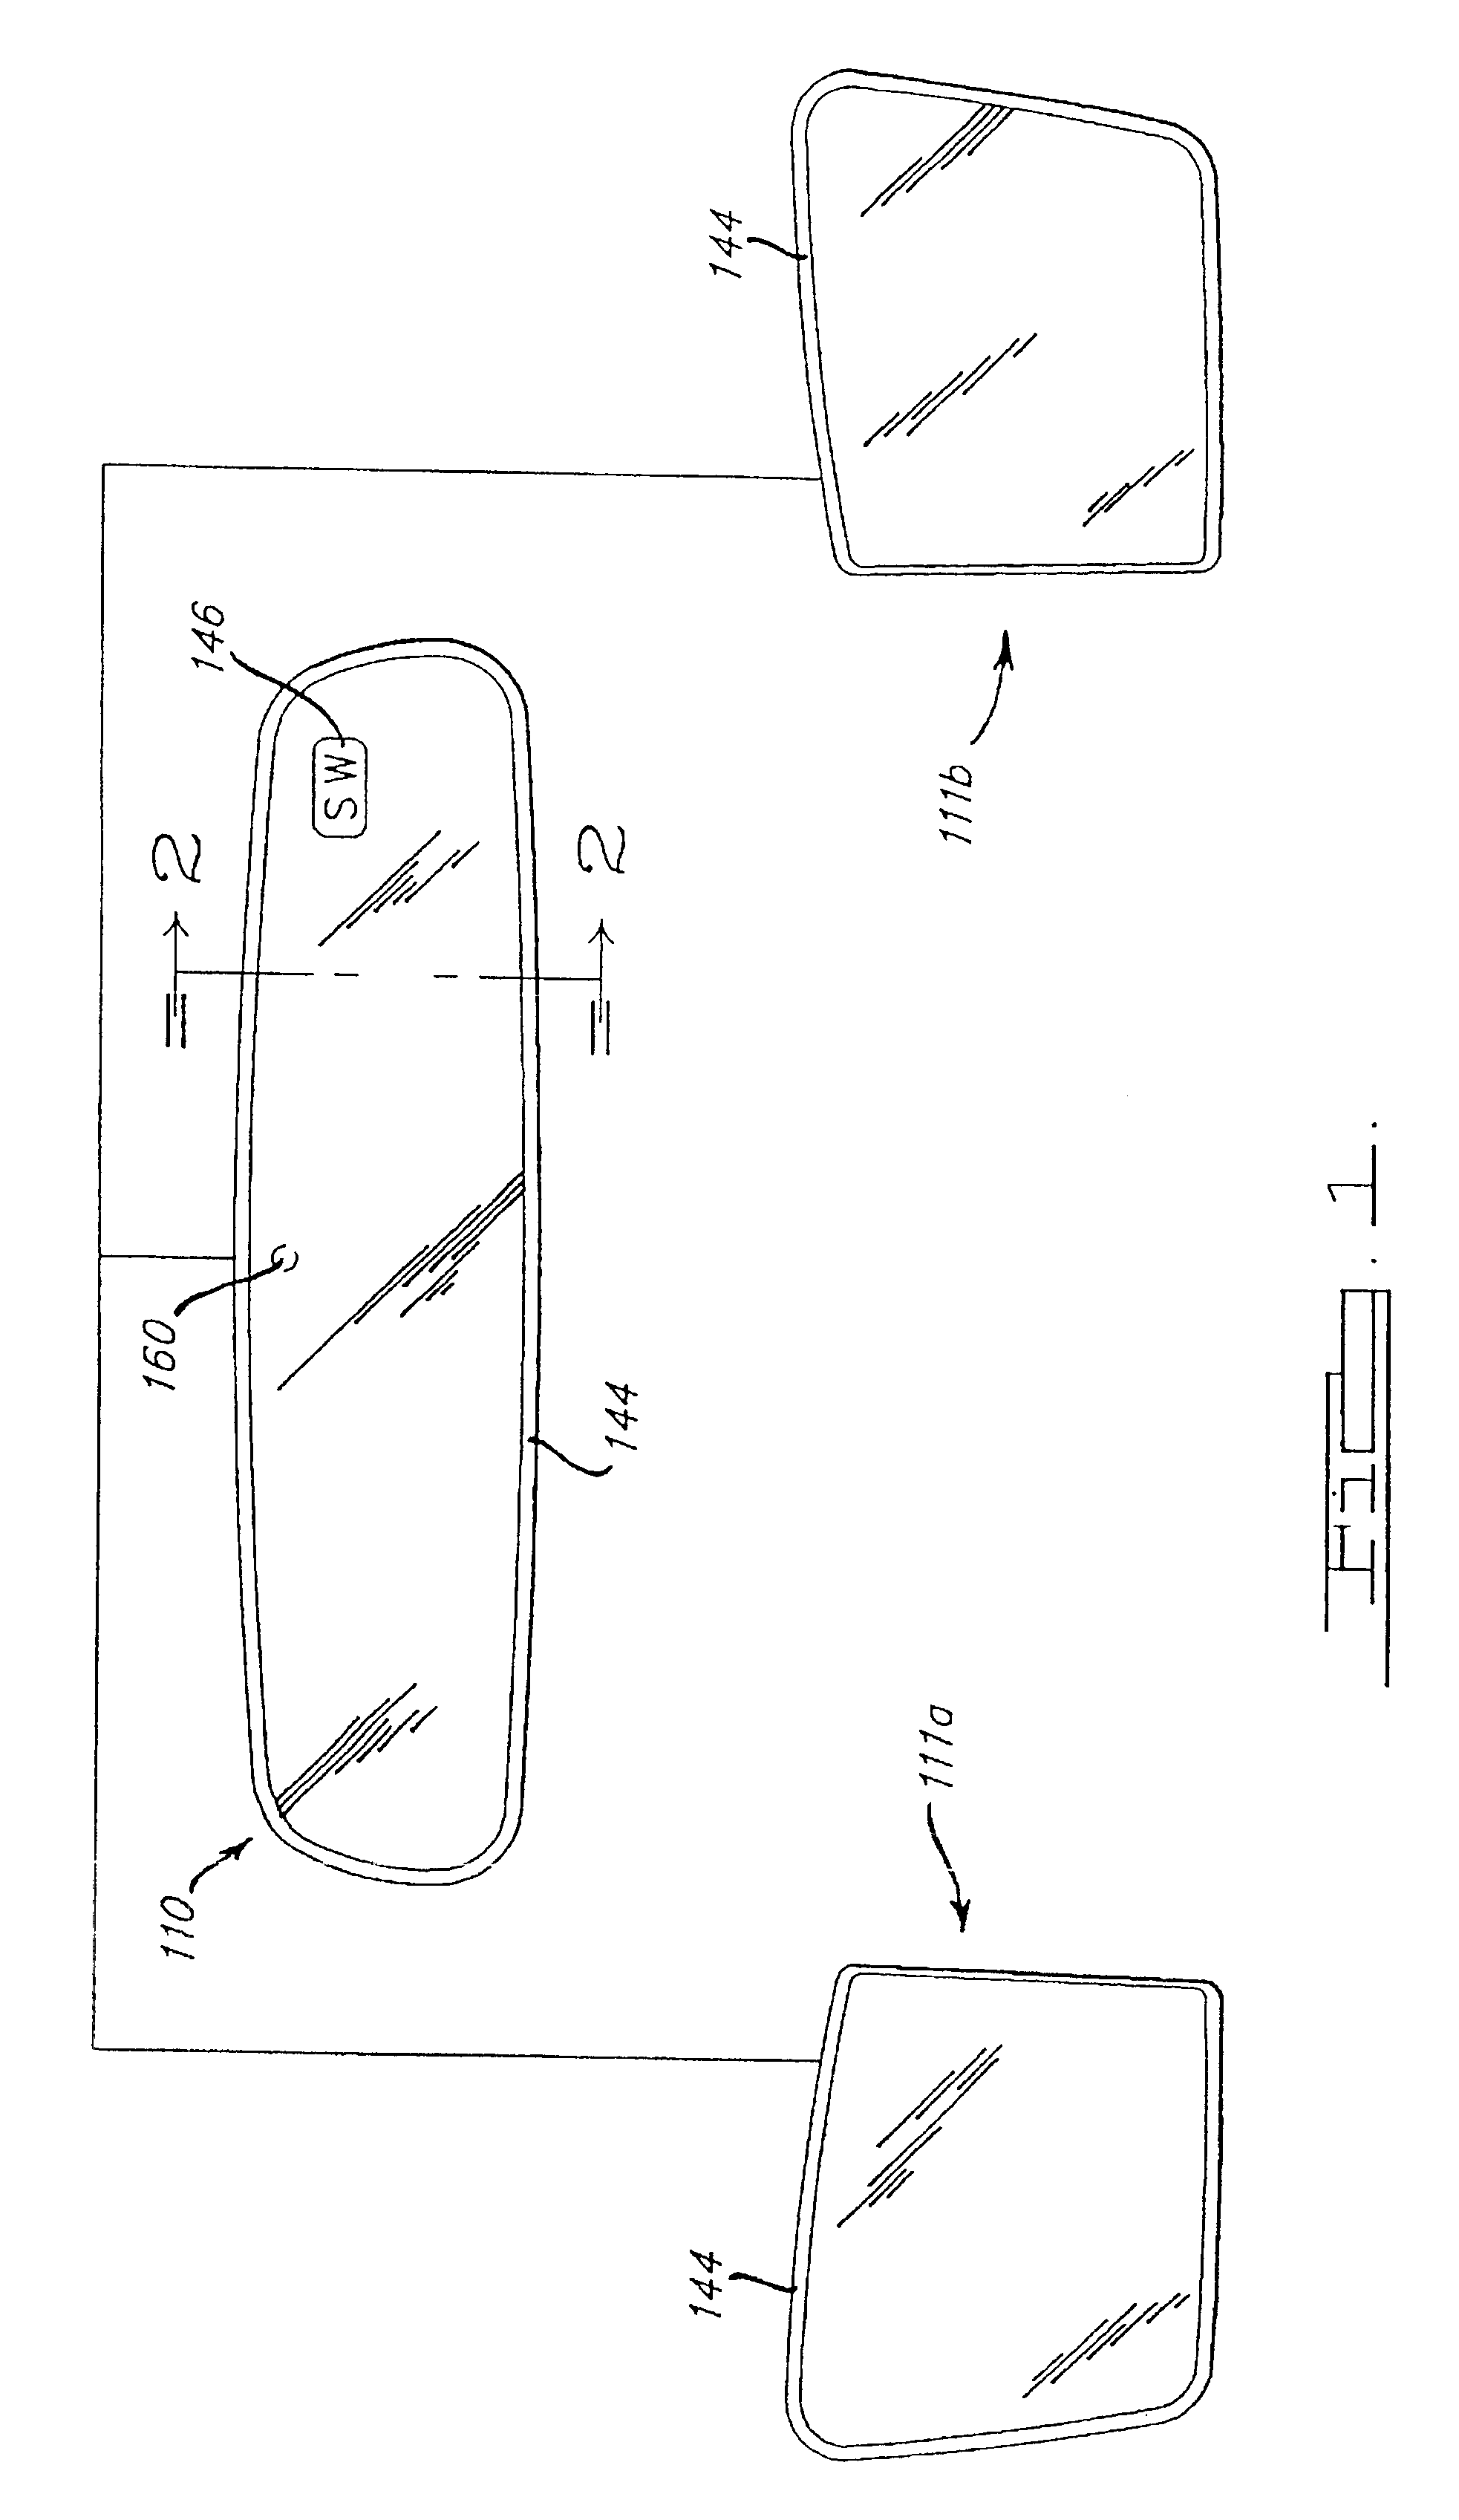 Electrochromic device with two thin glass elements and a gelled electrochromic medium